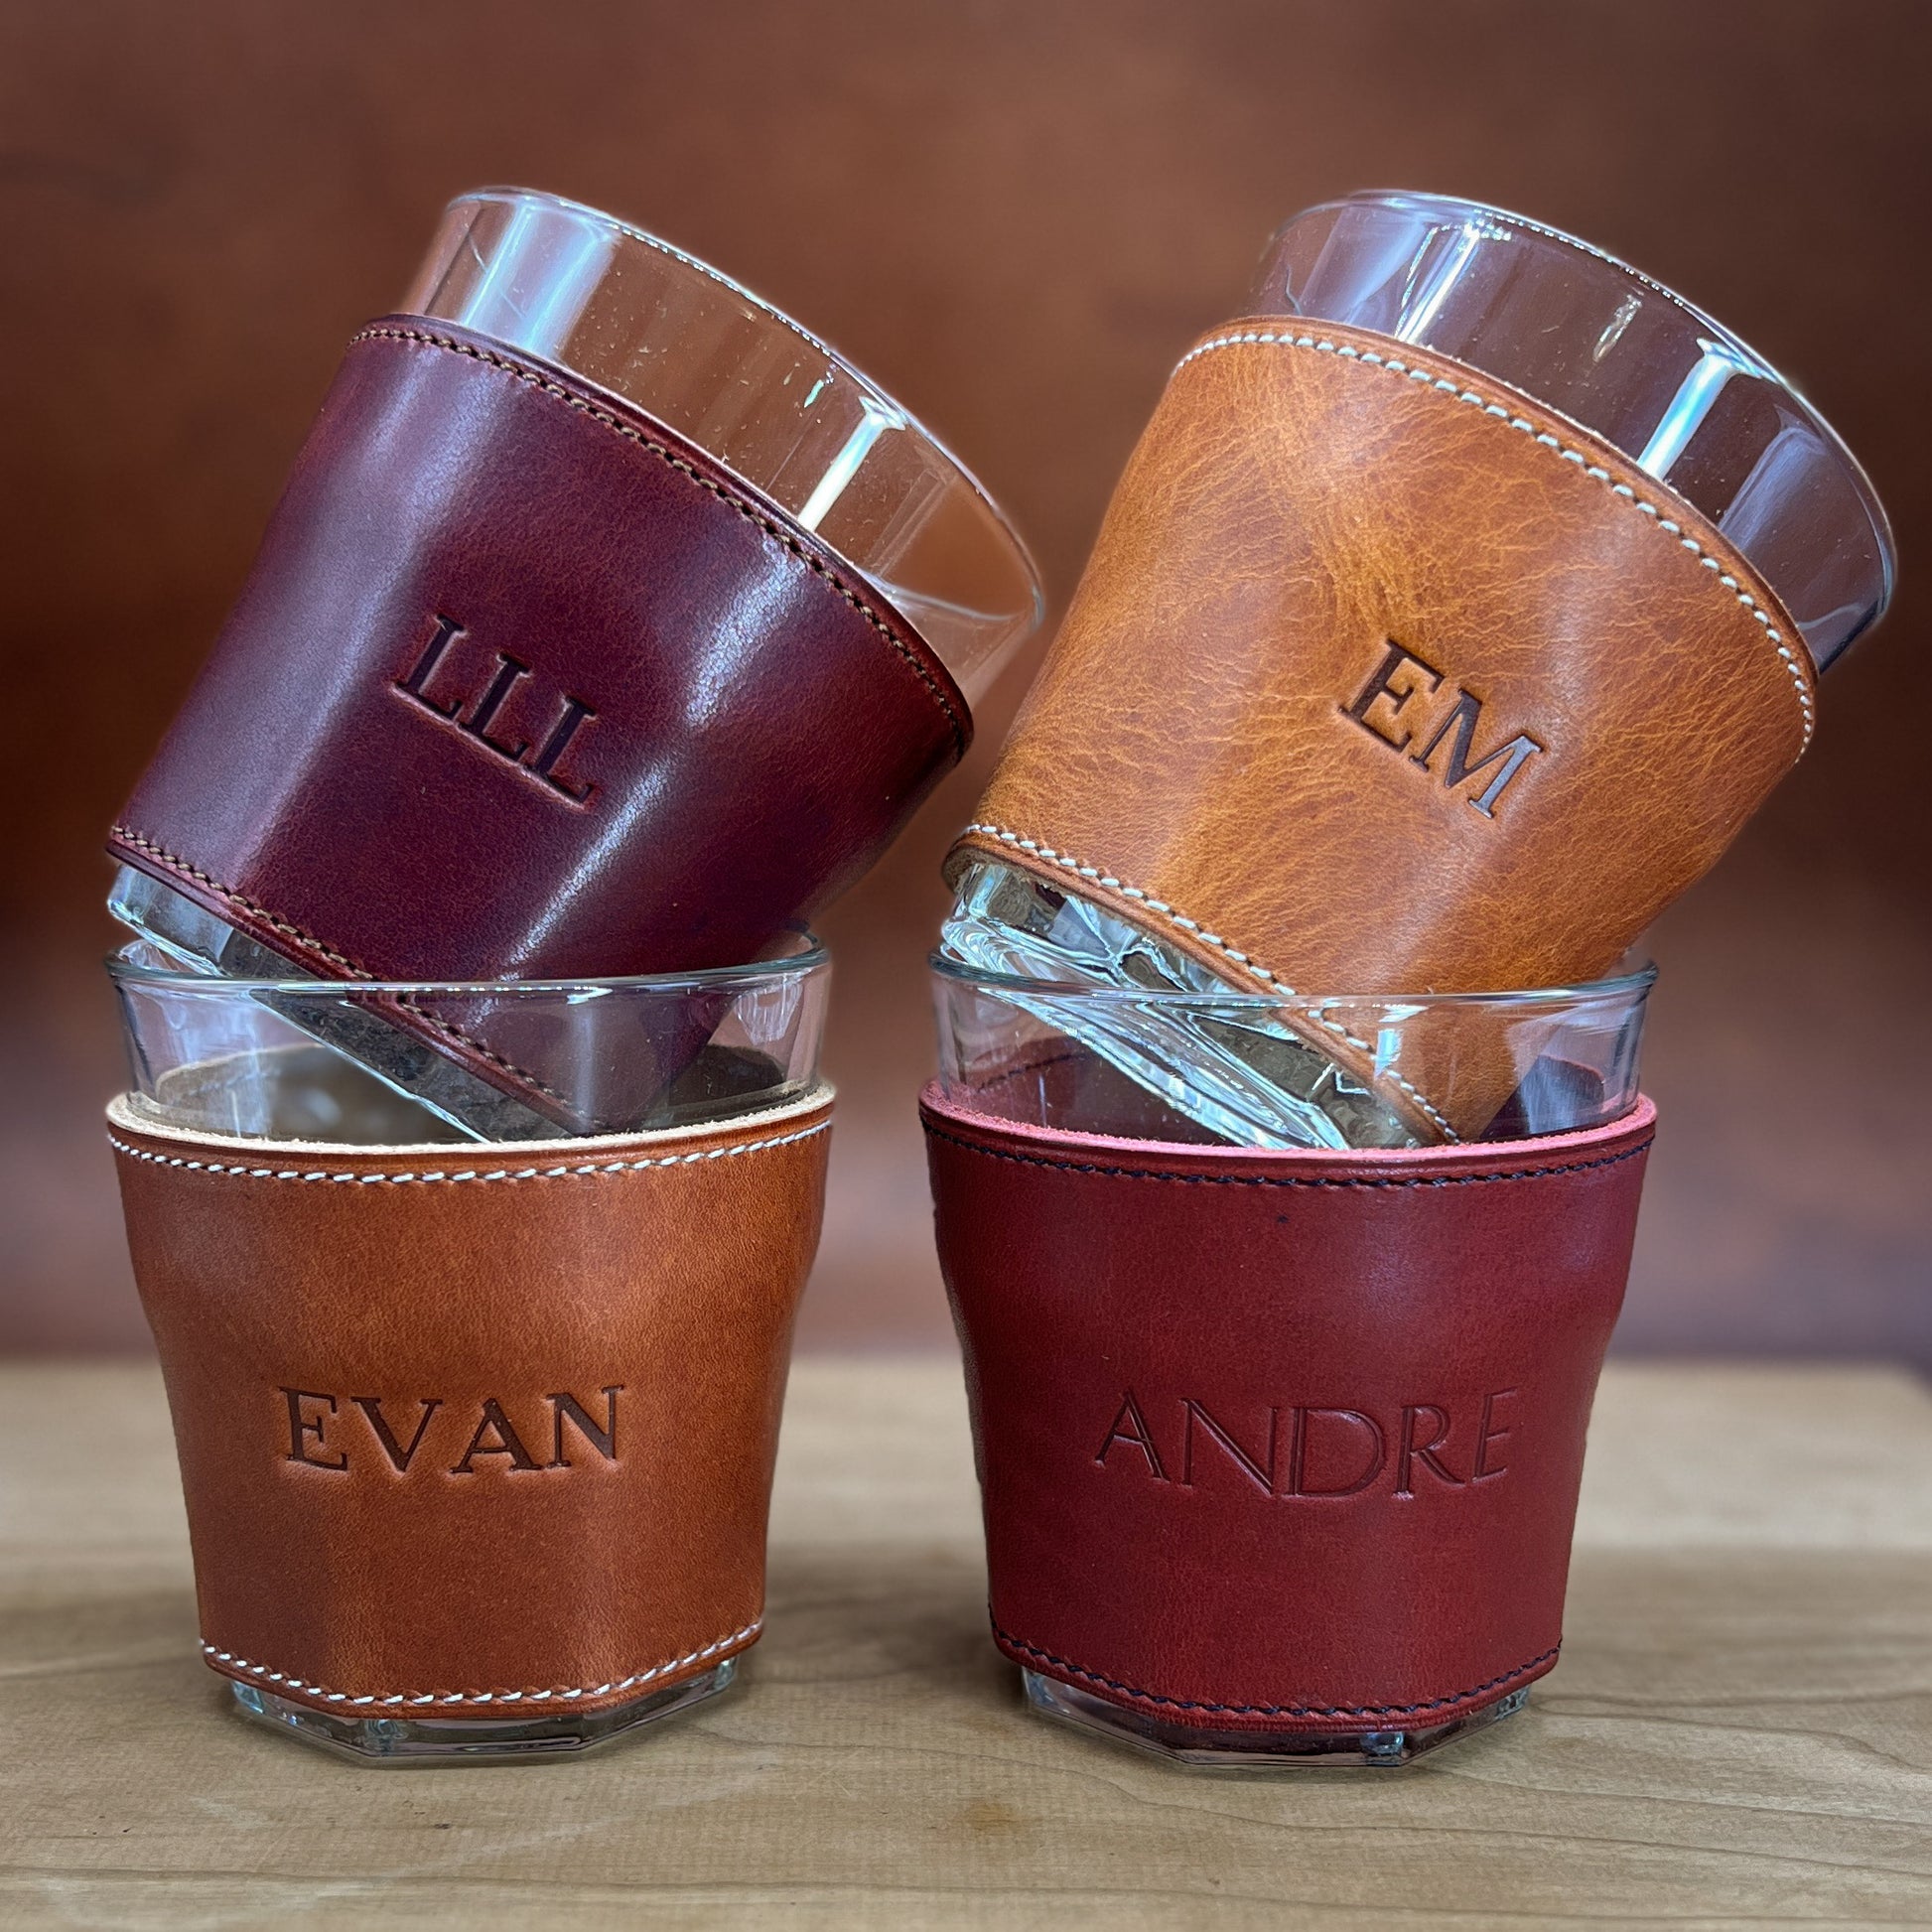 Handmade Whiskey Glasses wrapped in Horween leather including Russet Brown, English Tan, Bourbon and London Red colors.